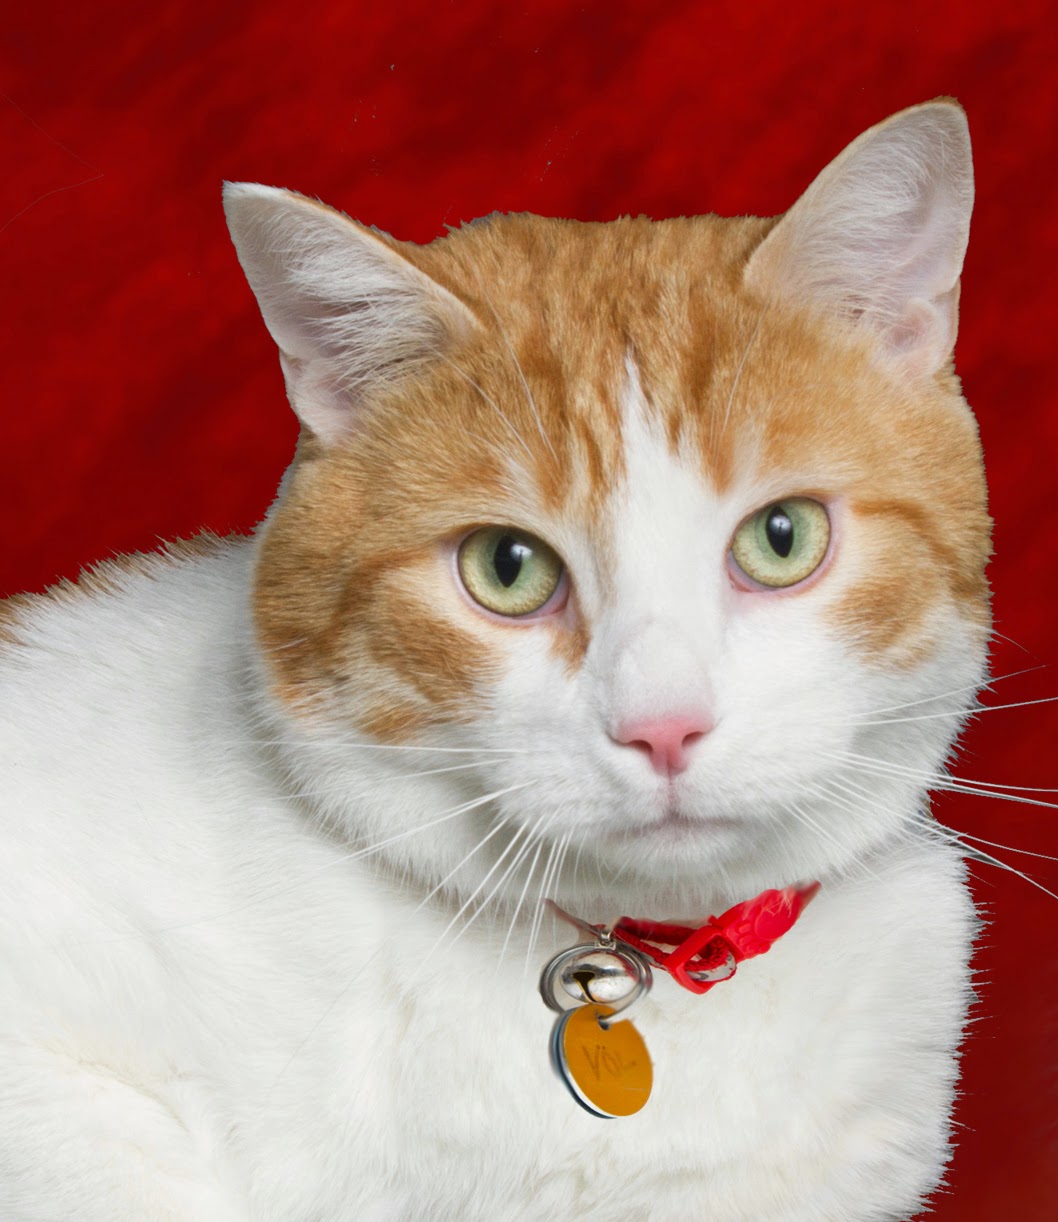 Discover The Kitties Behind The Label Adopt A Special Needs Cat In May And Get A Free Vet Visit Ottawa Humane Society